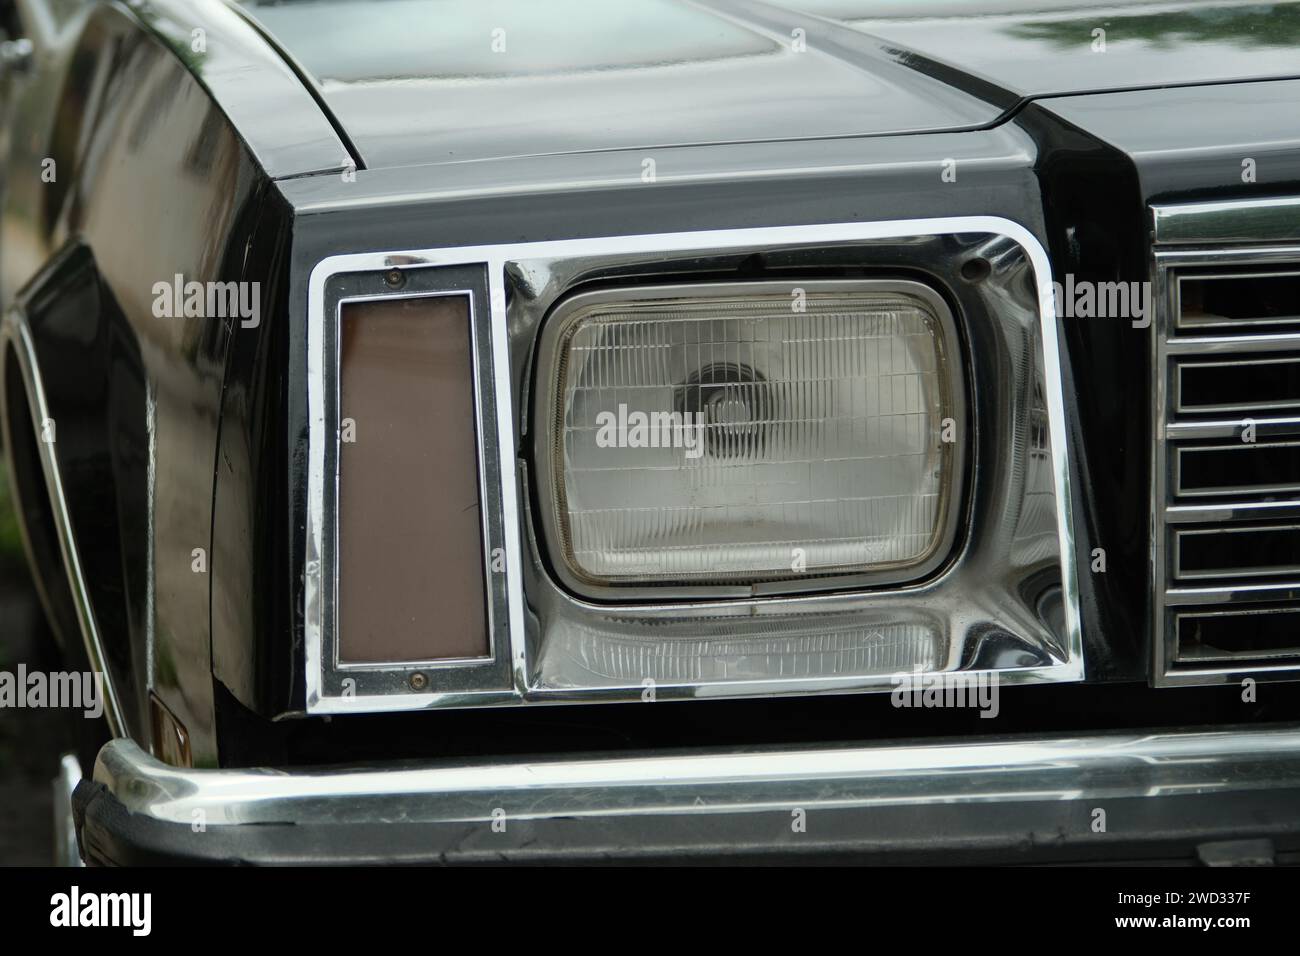 Headlight of an old Buick police patrol car, daytime close-up photo, without people, Buenos Aires, Argentina Stock Photo